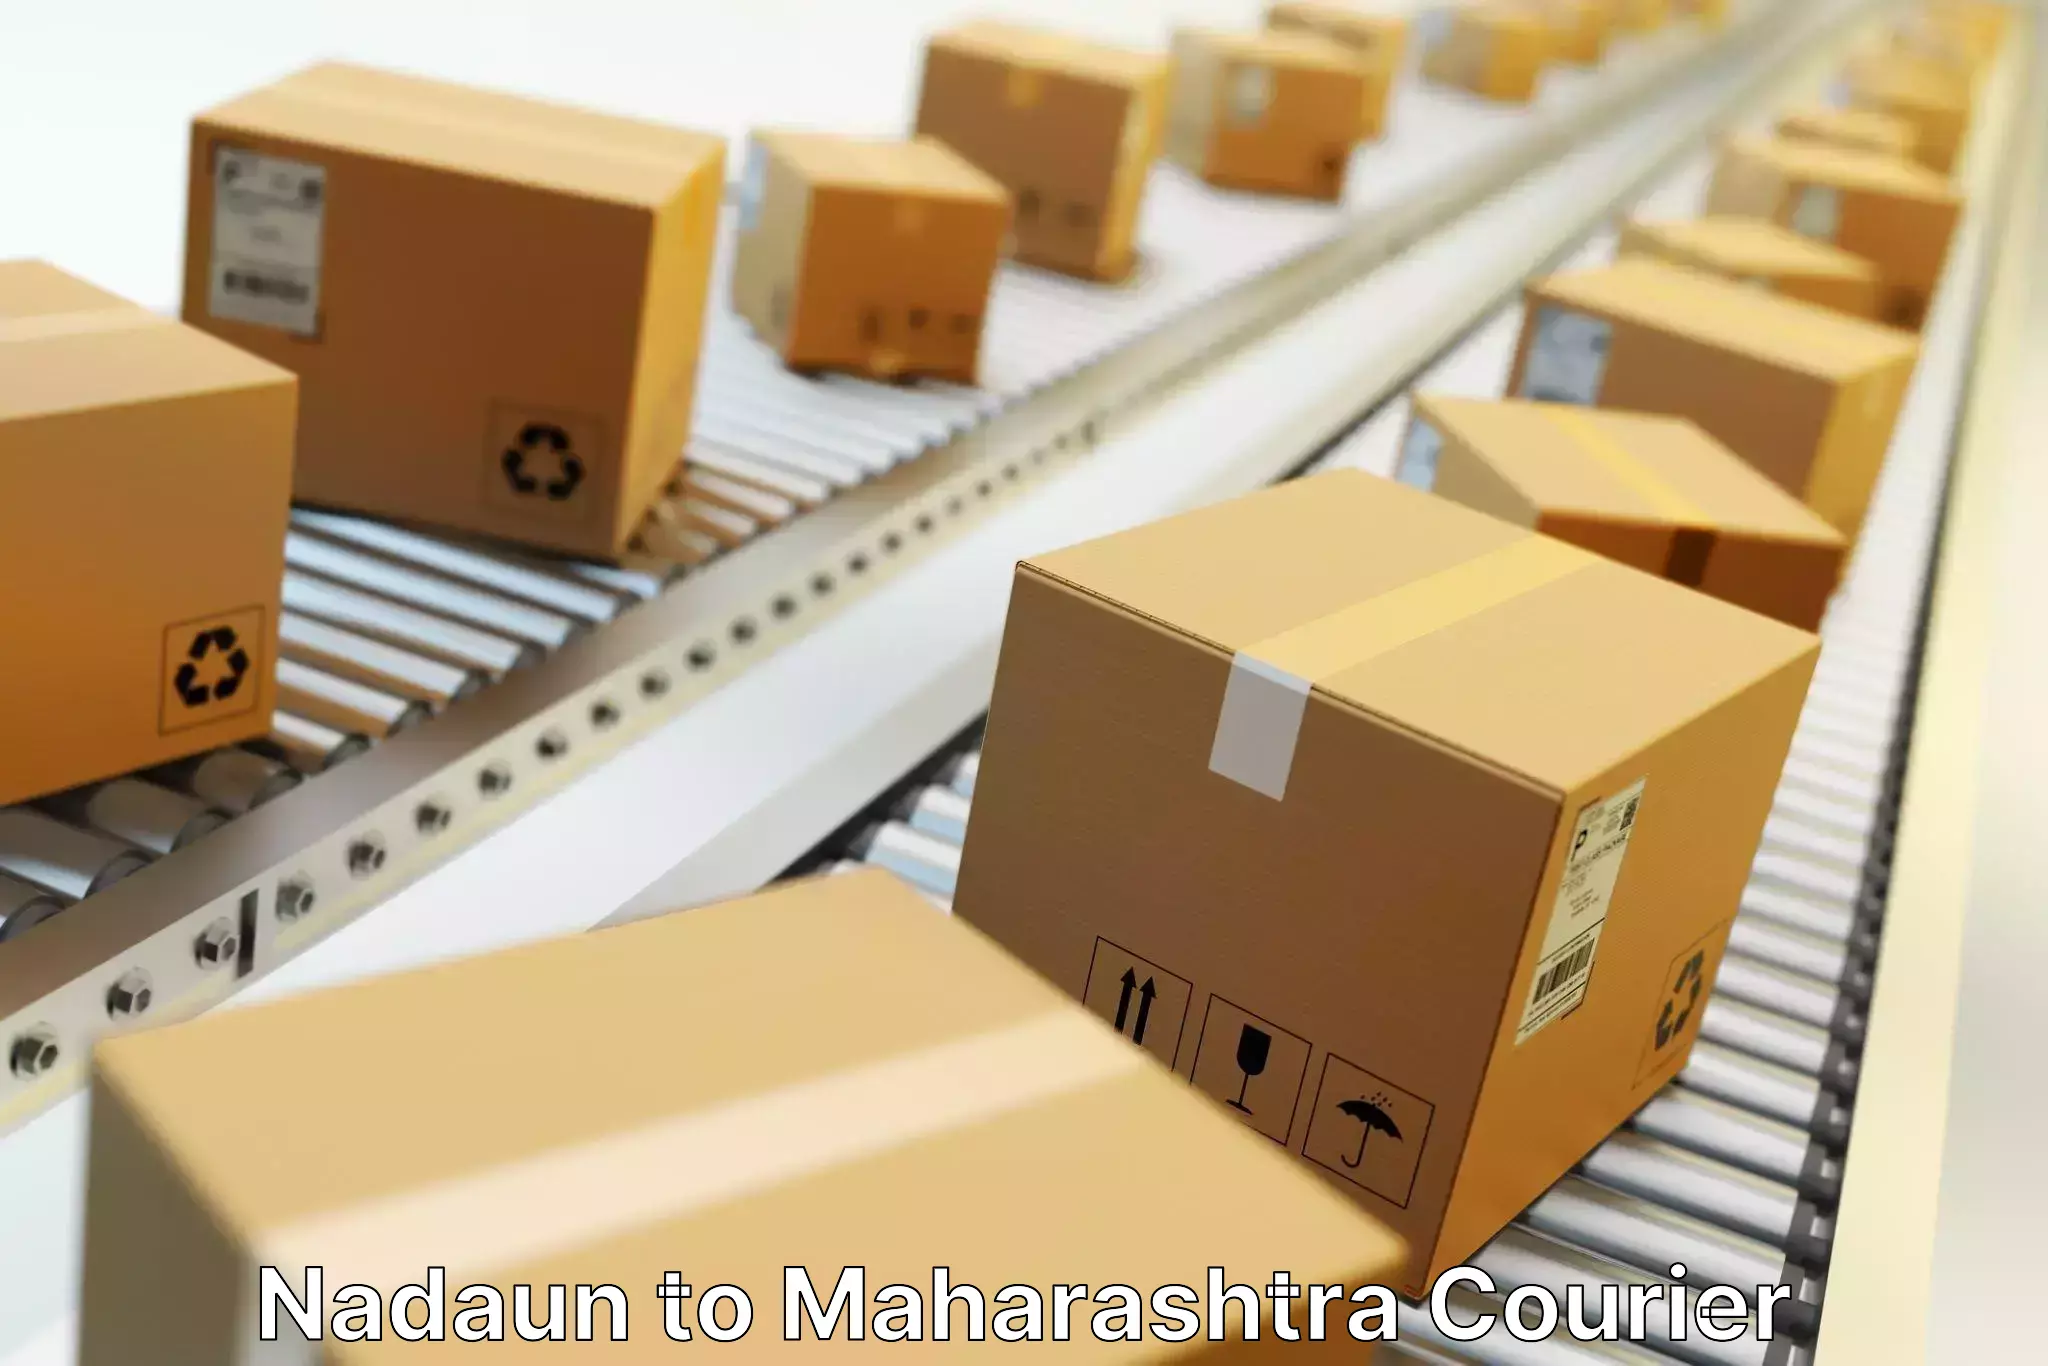 Express delivery capabilities Nadaun to Nagothane